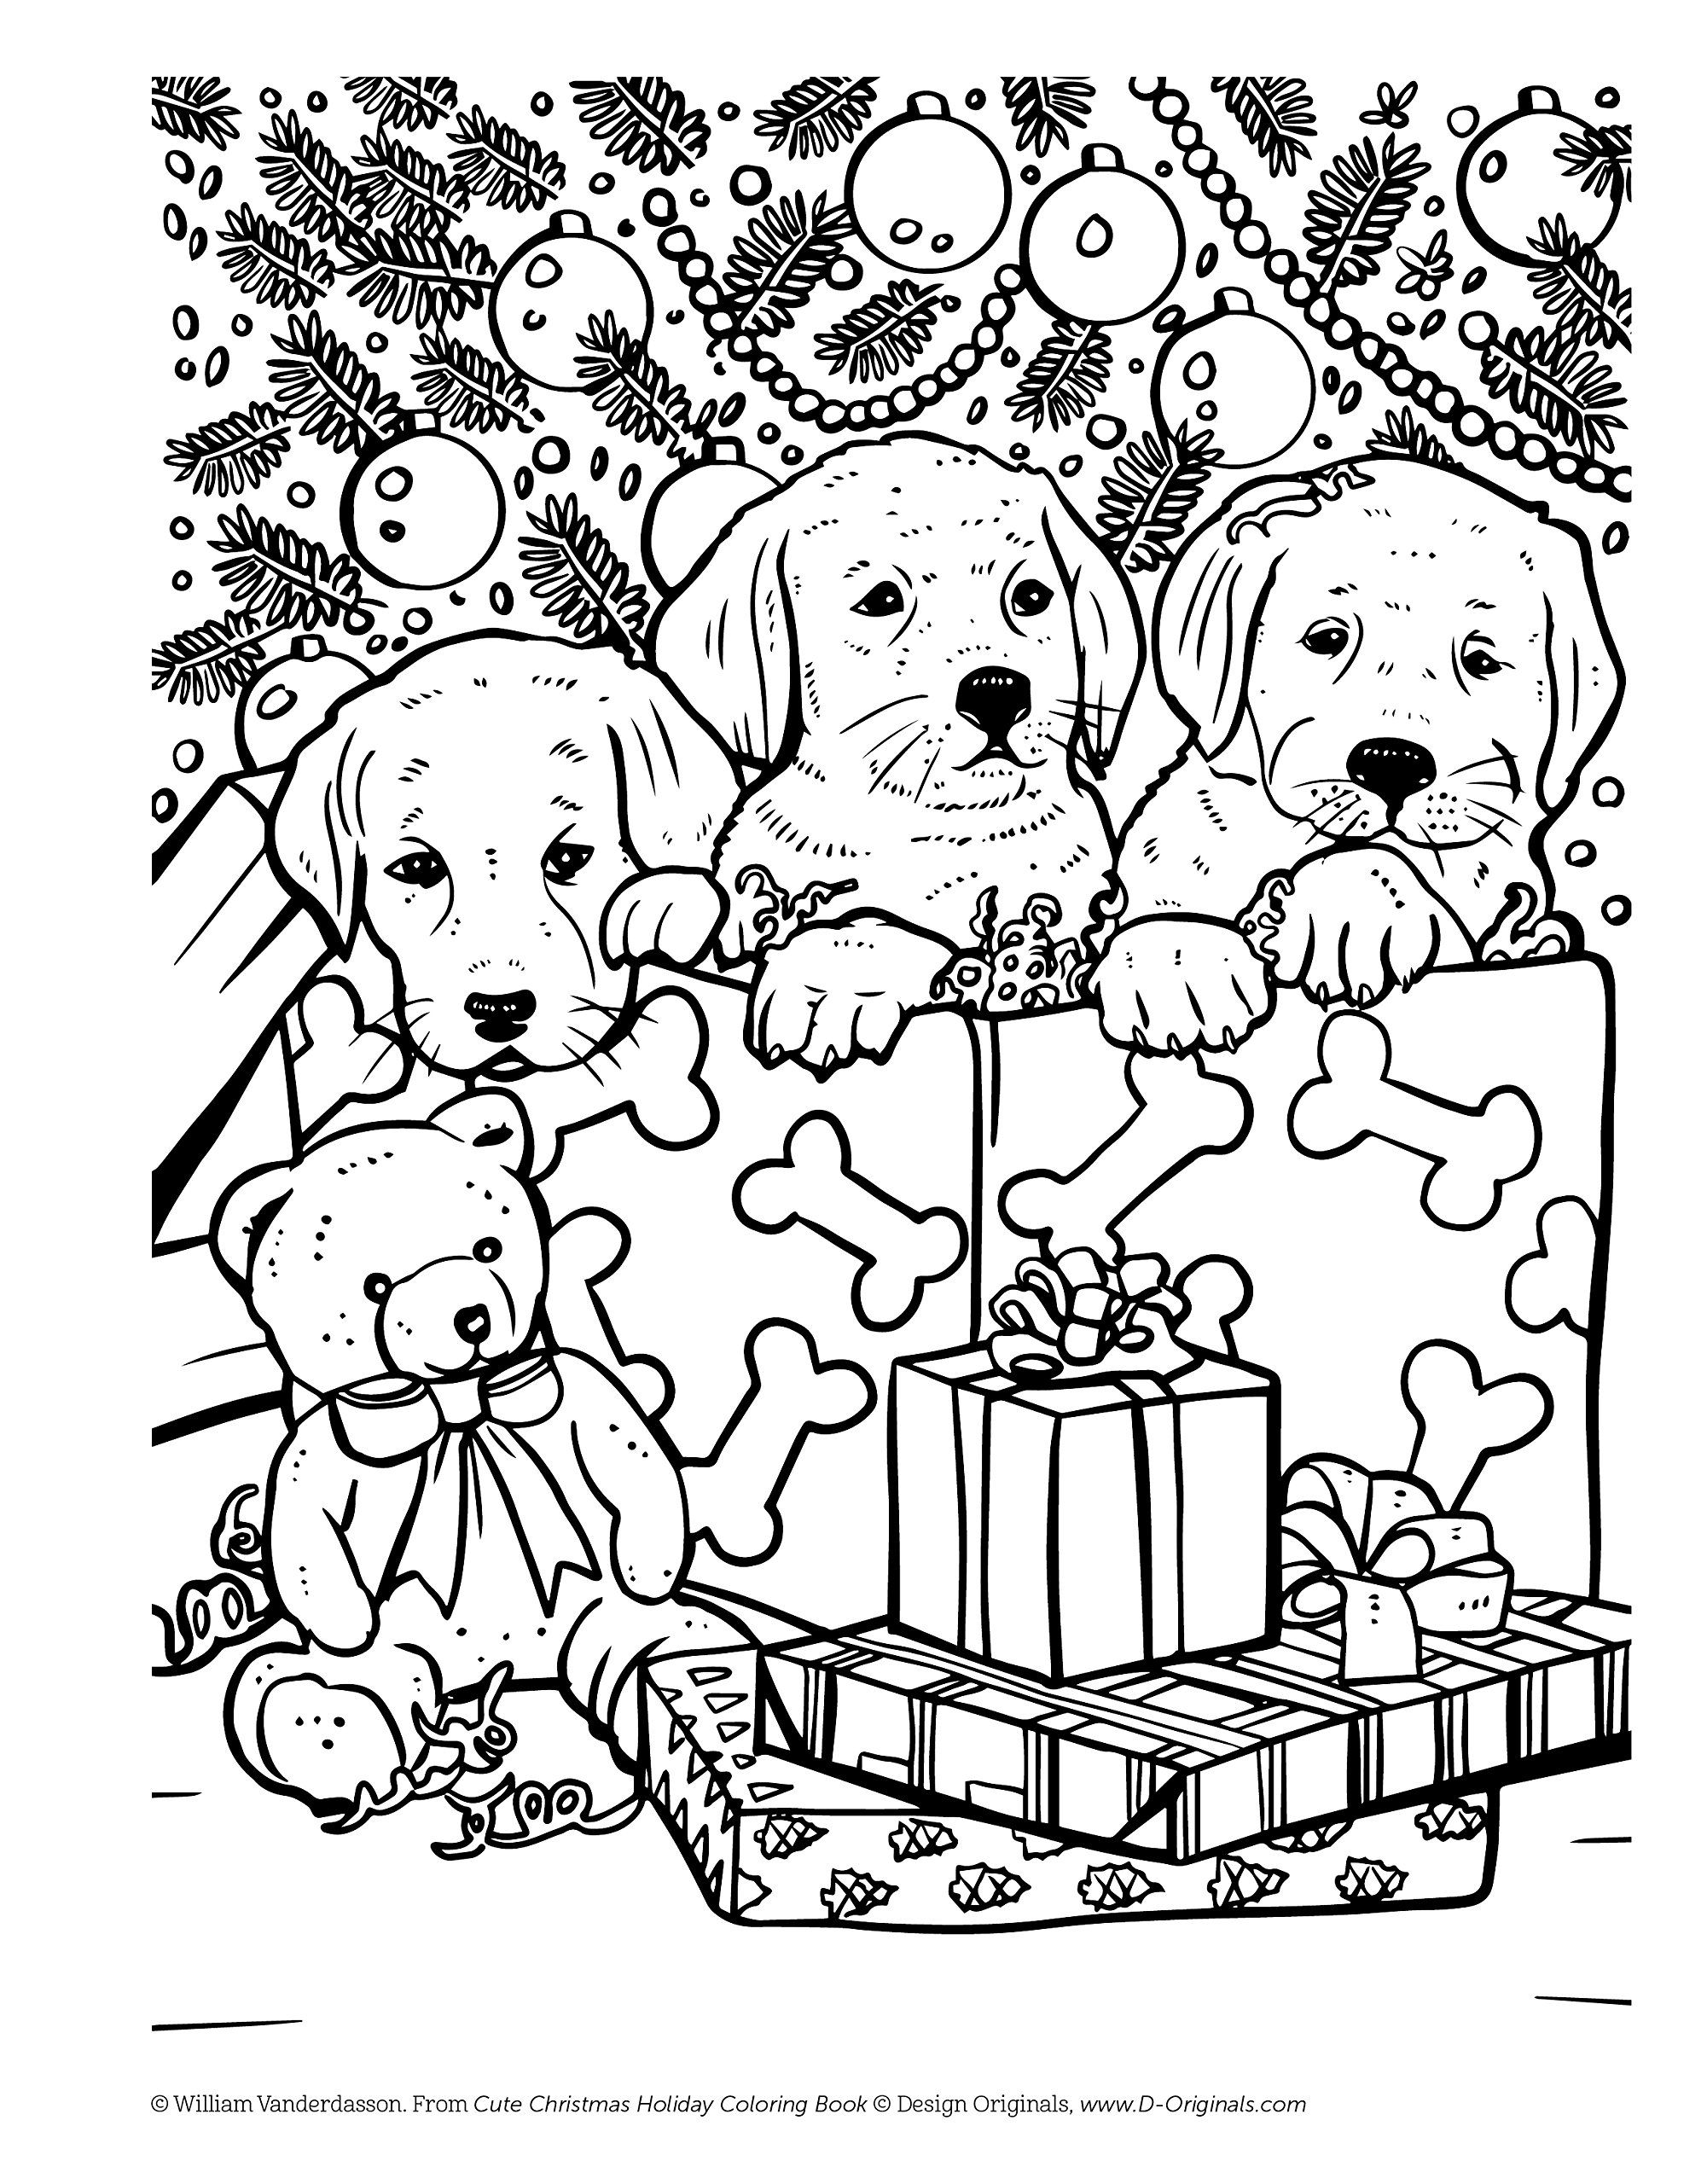 Christmas holiday coloring book for animal lovers